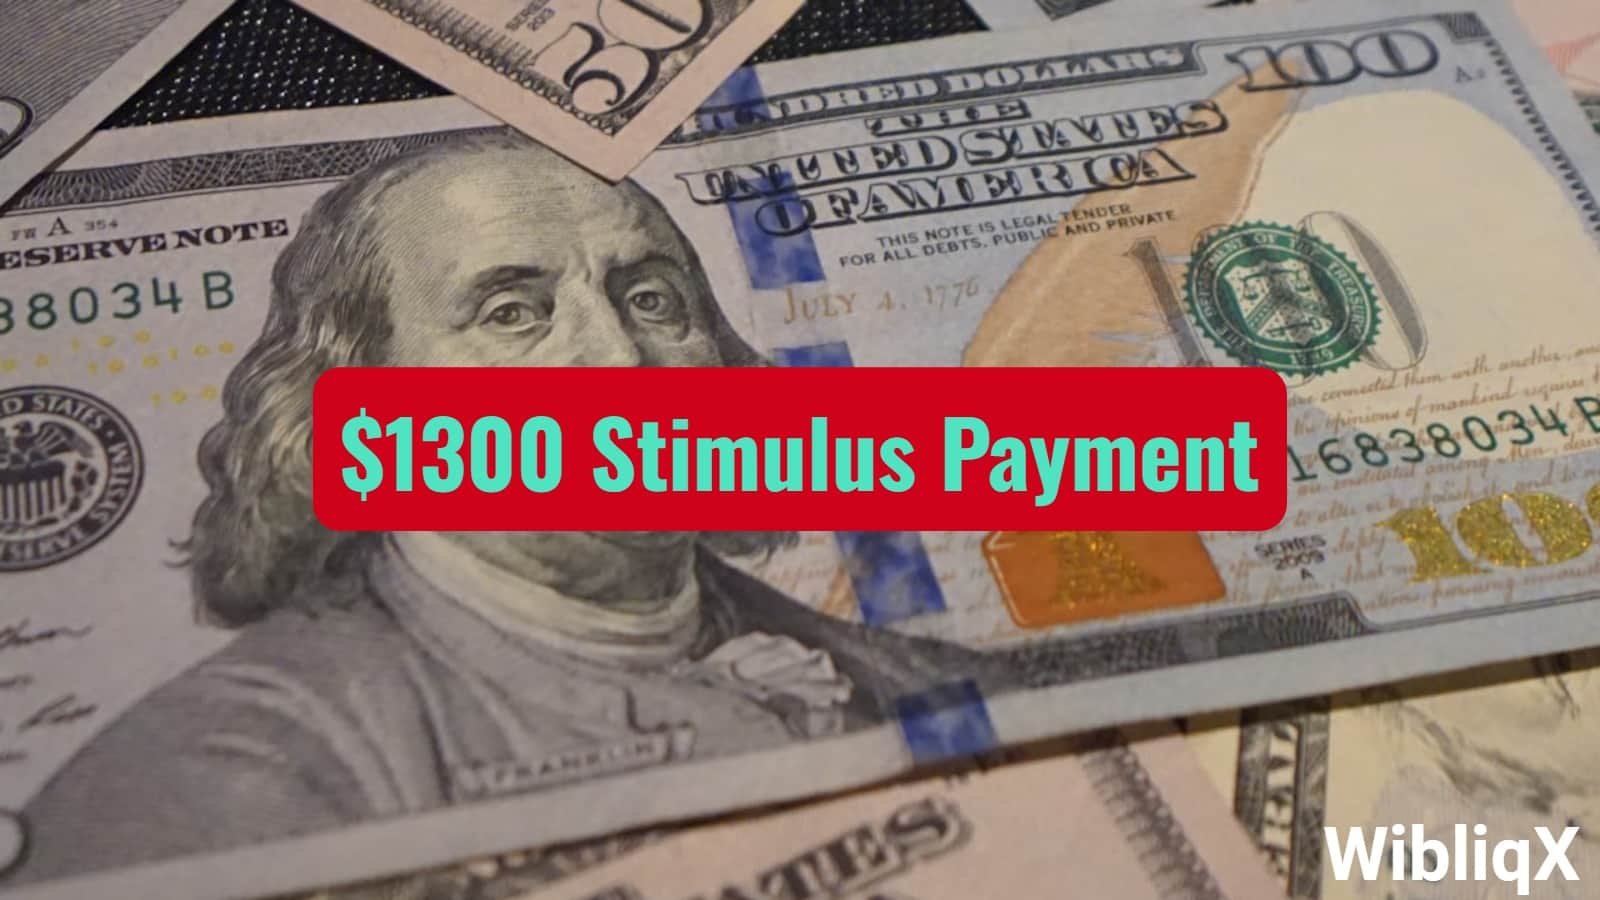 Who Qualifies for the $1300 Stimulus Payment